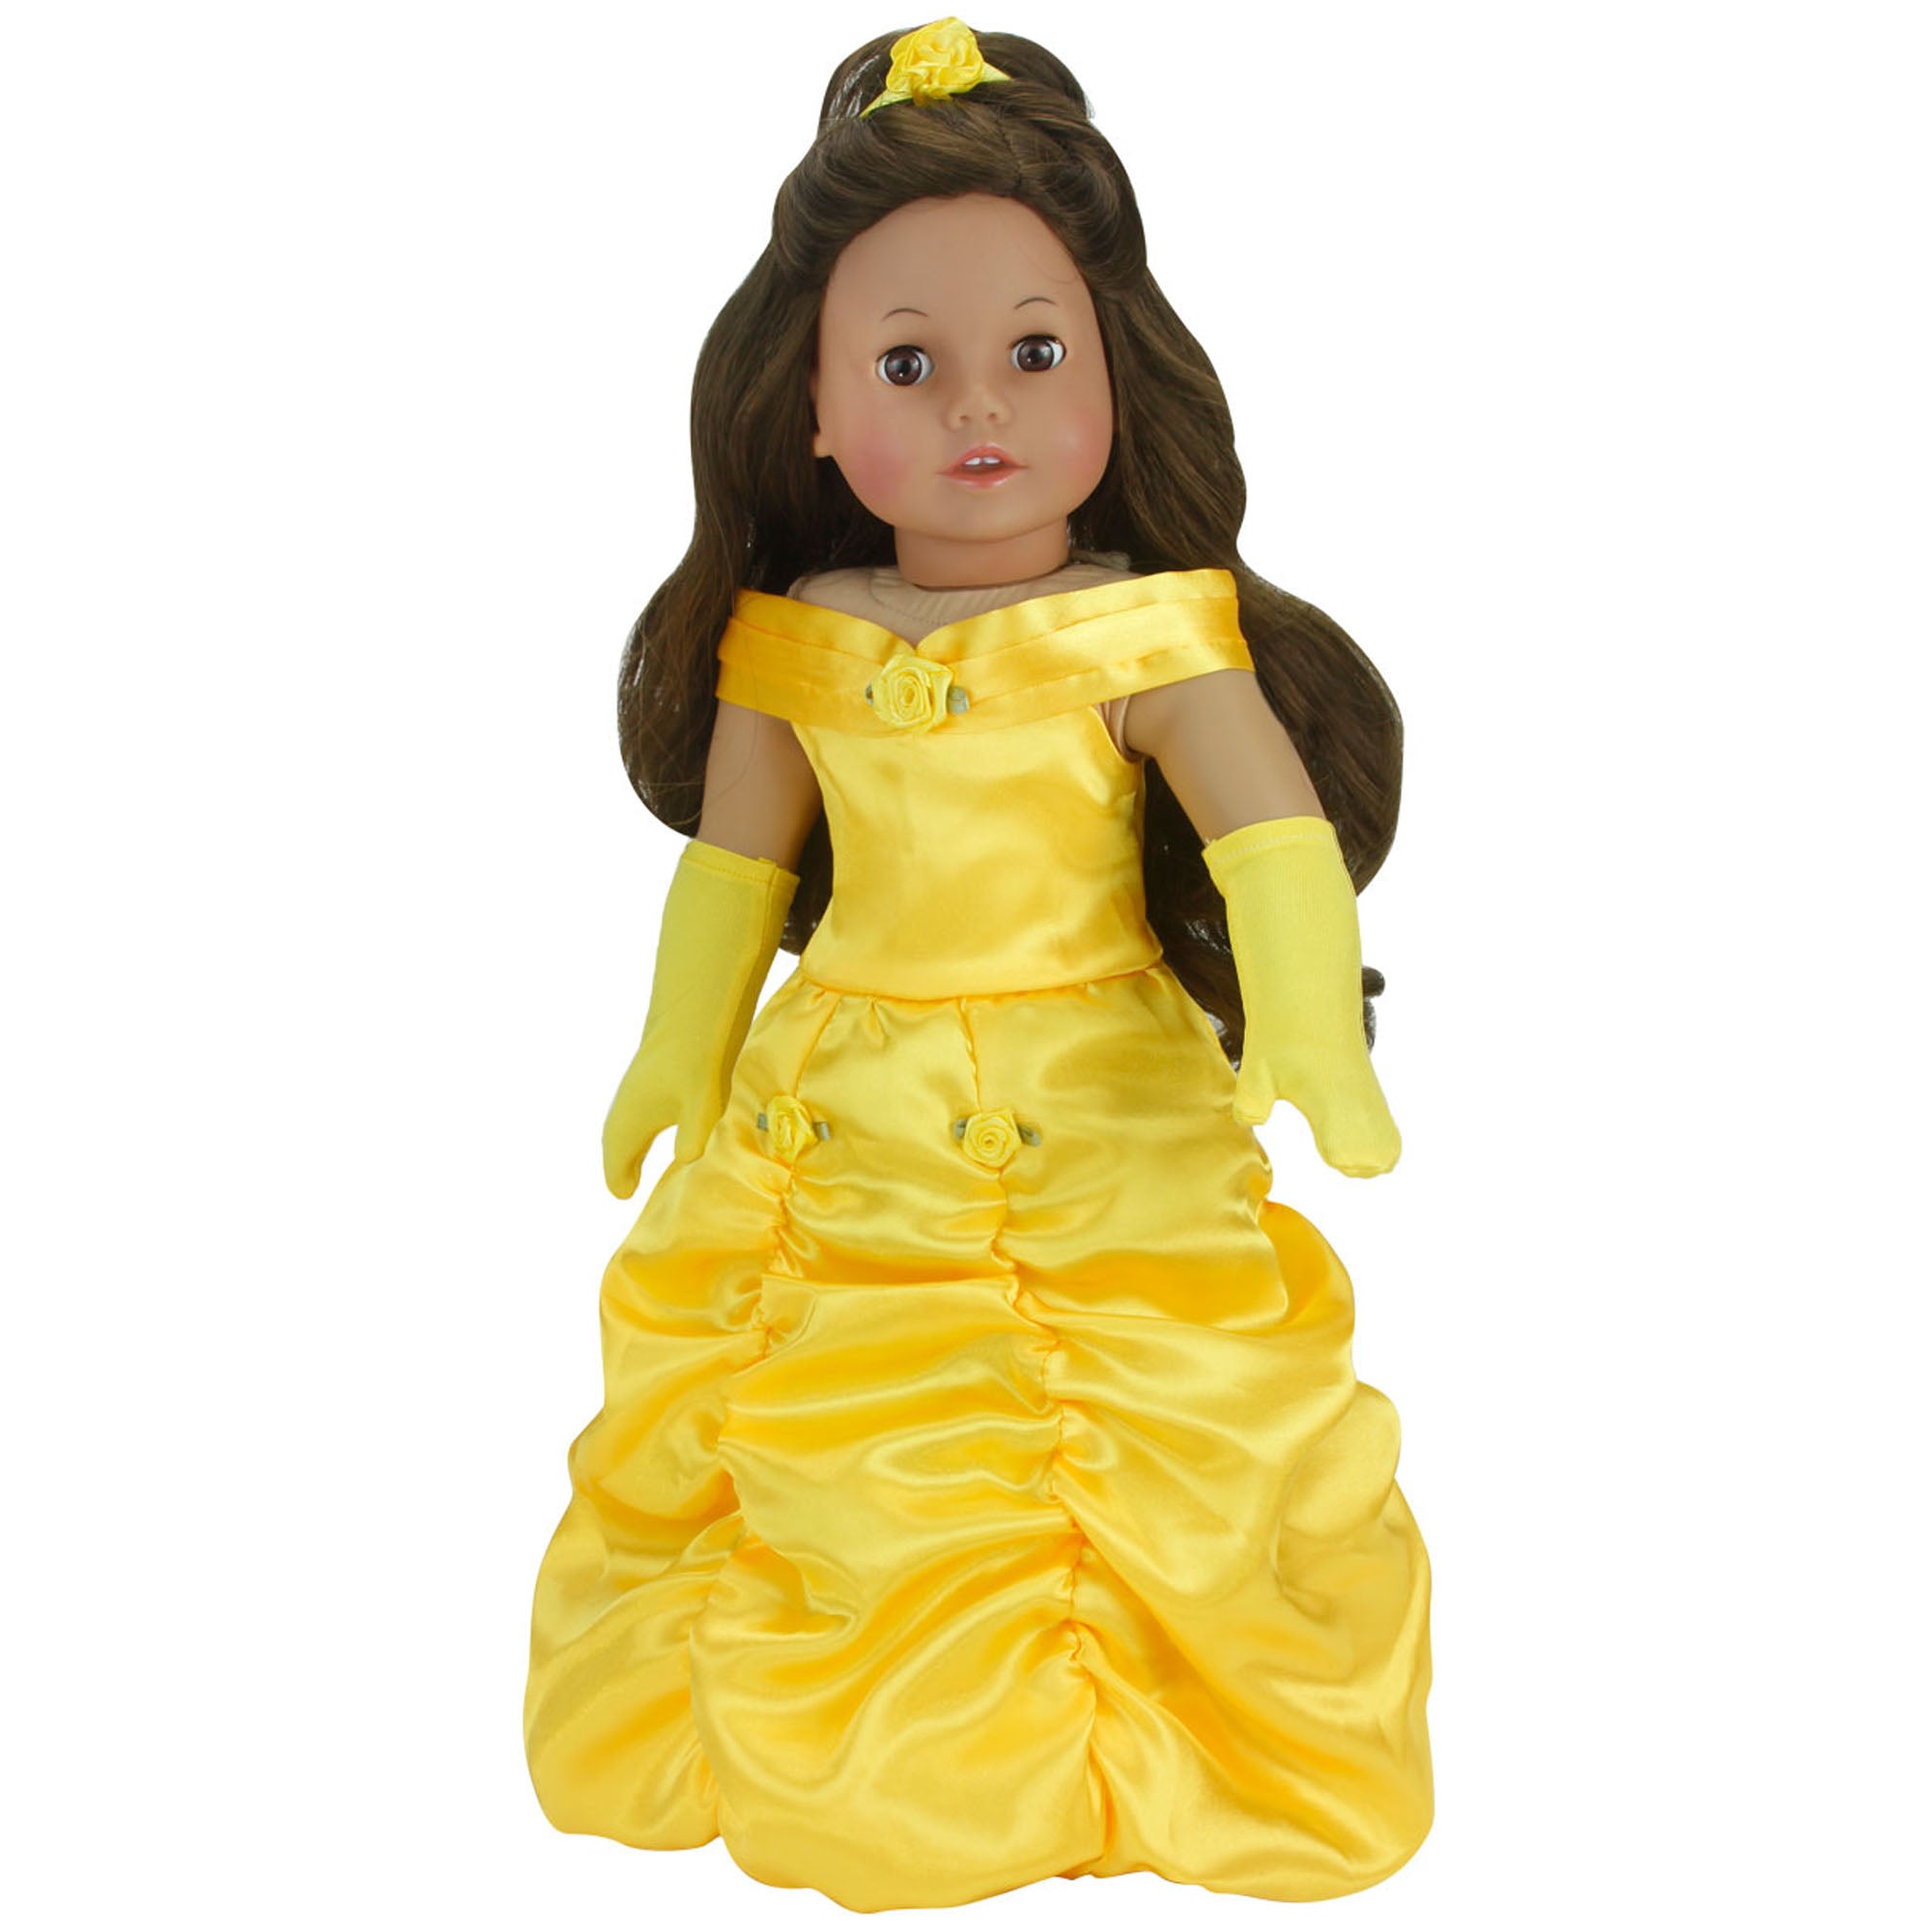 Sophia’s Belle of the Ball Three-Piece Princess Dress, Gloves, & Hair Accessory Costume Set for 18” Dolls, Yellow